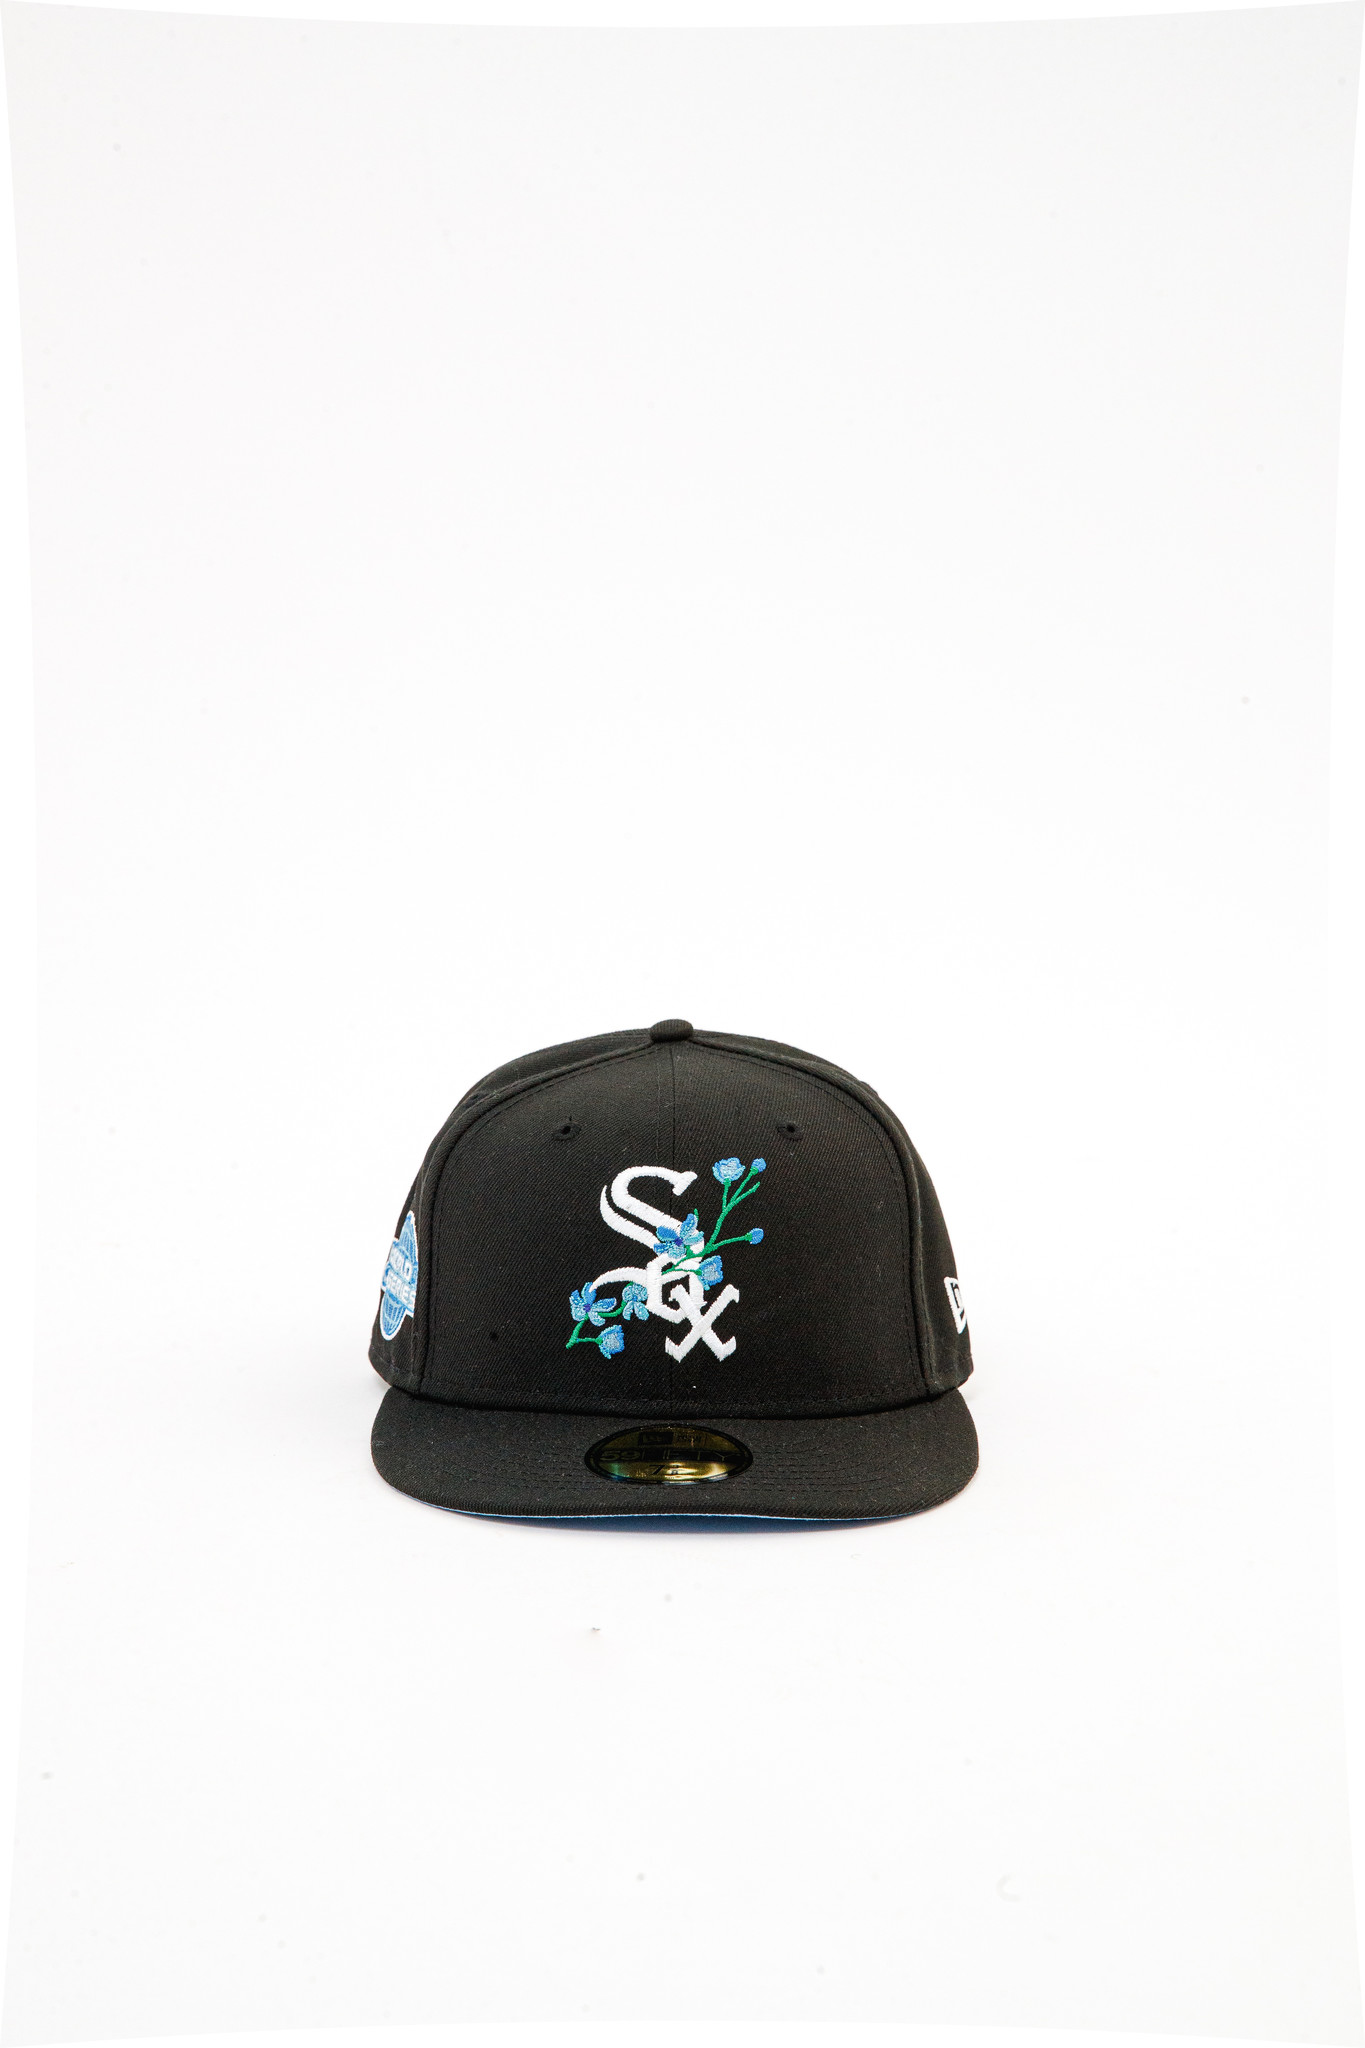 New Era 59Fifty Chicago White Sox Side Patch Fitted Hat, black